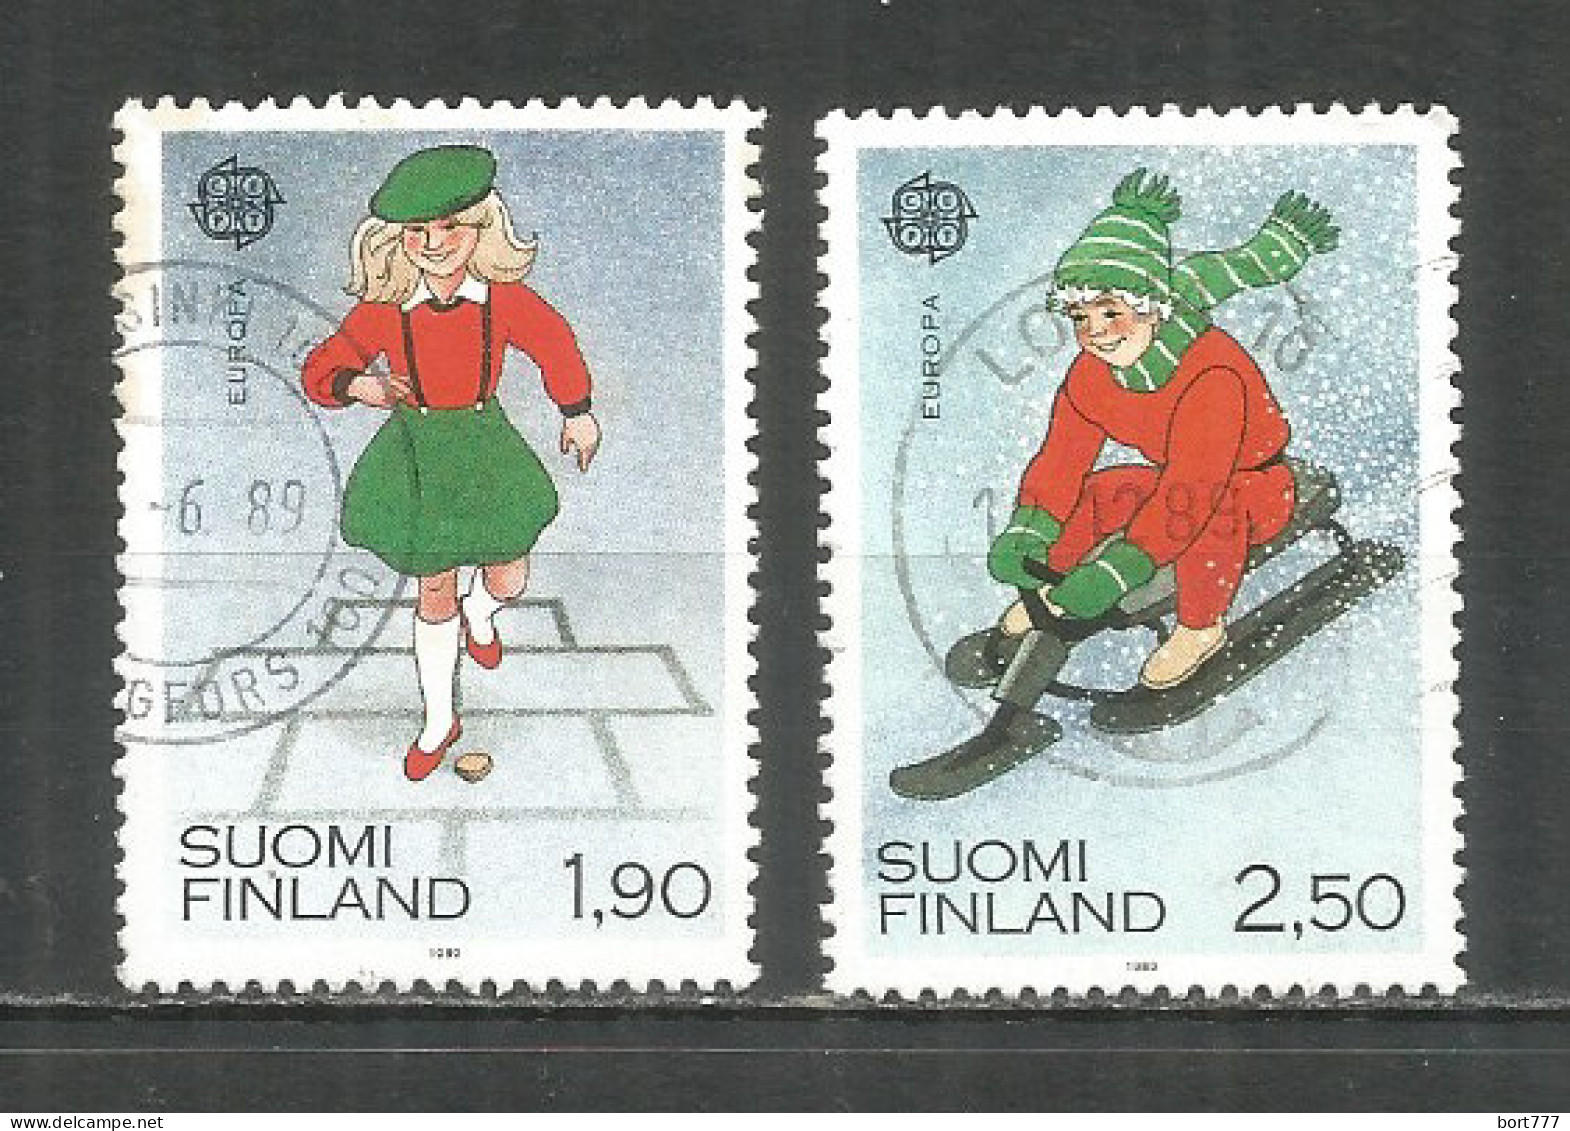 Finland 1989 Used Stamps EUROPA CEPT - Usati